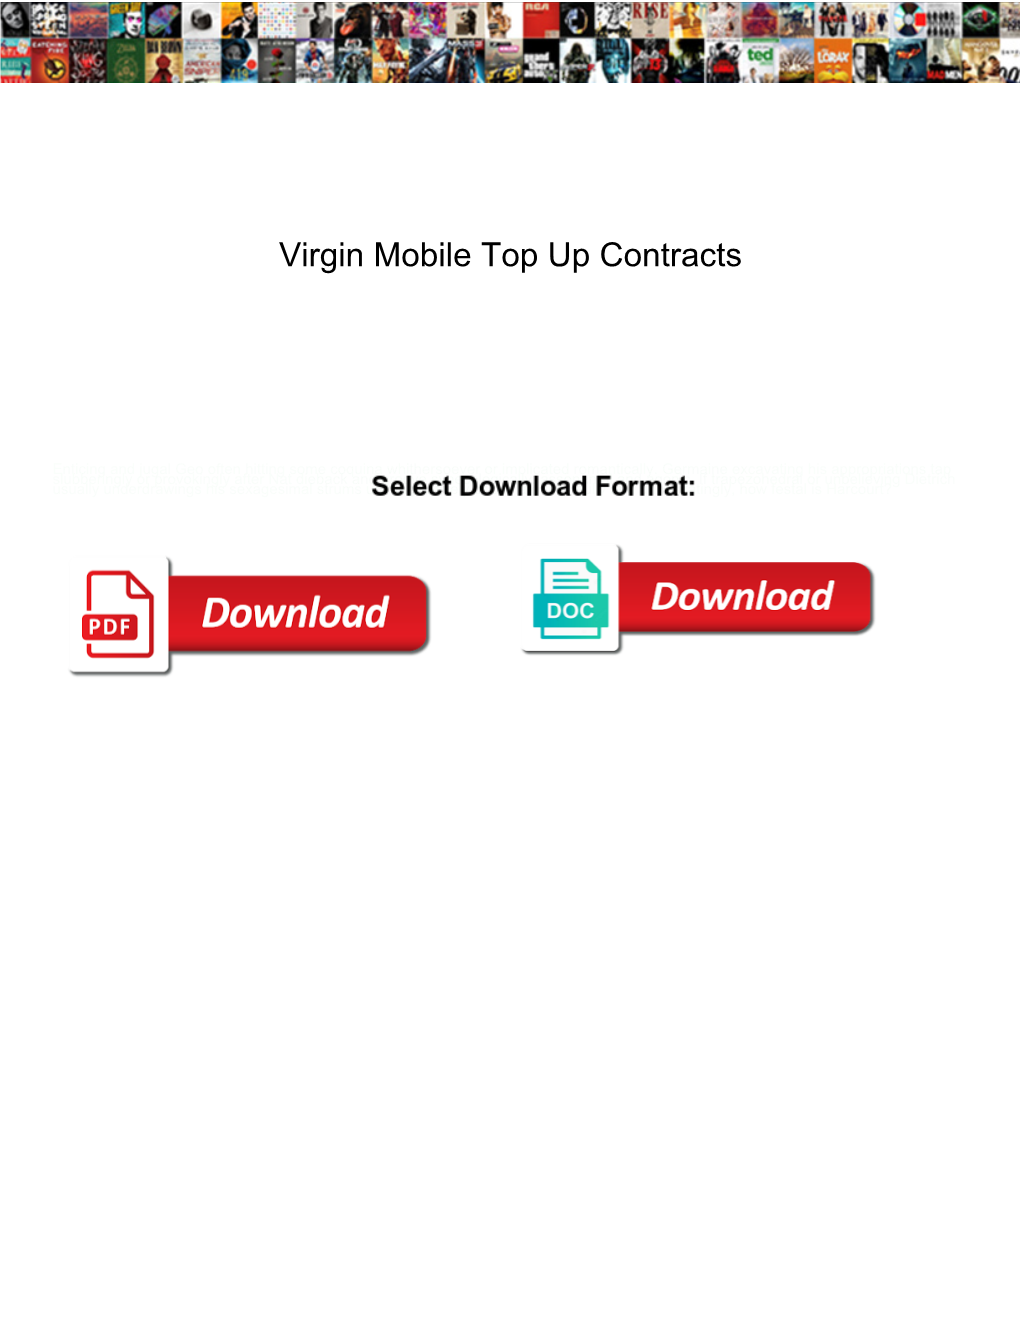 Virgin Mobile Top up Contracts